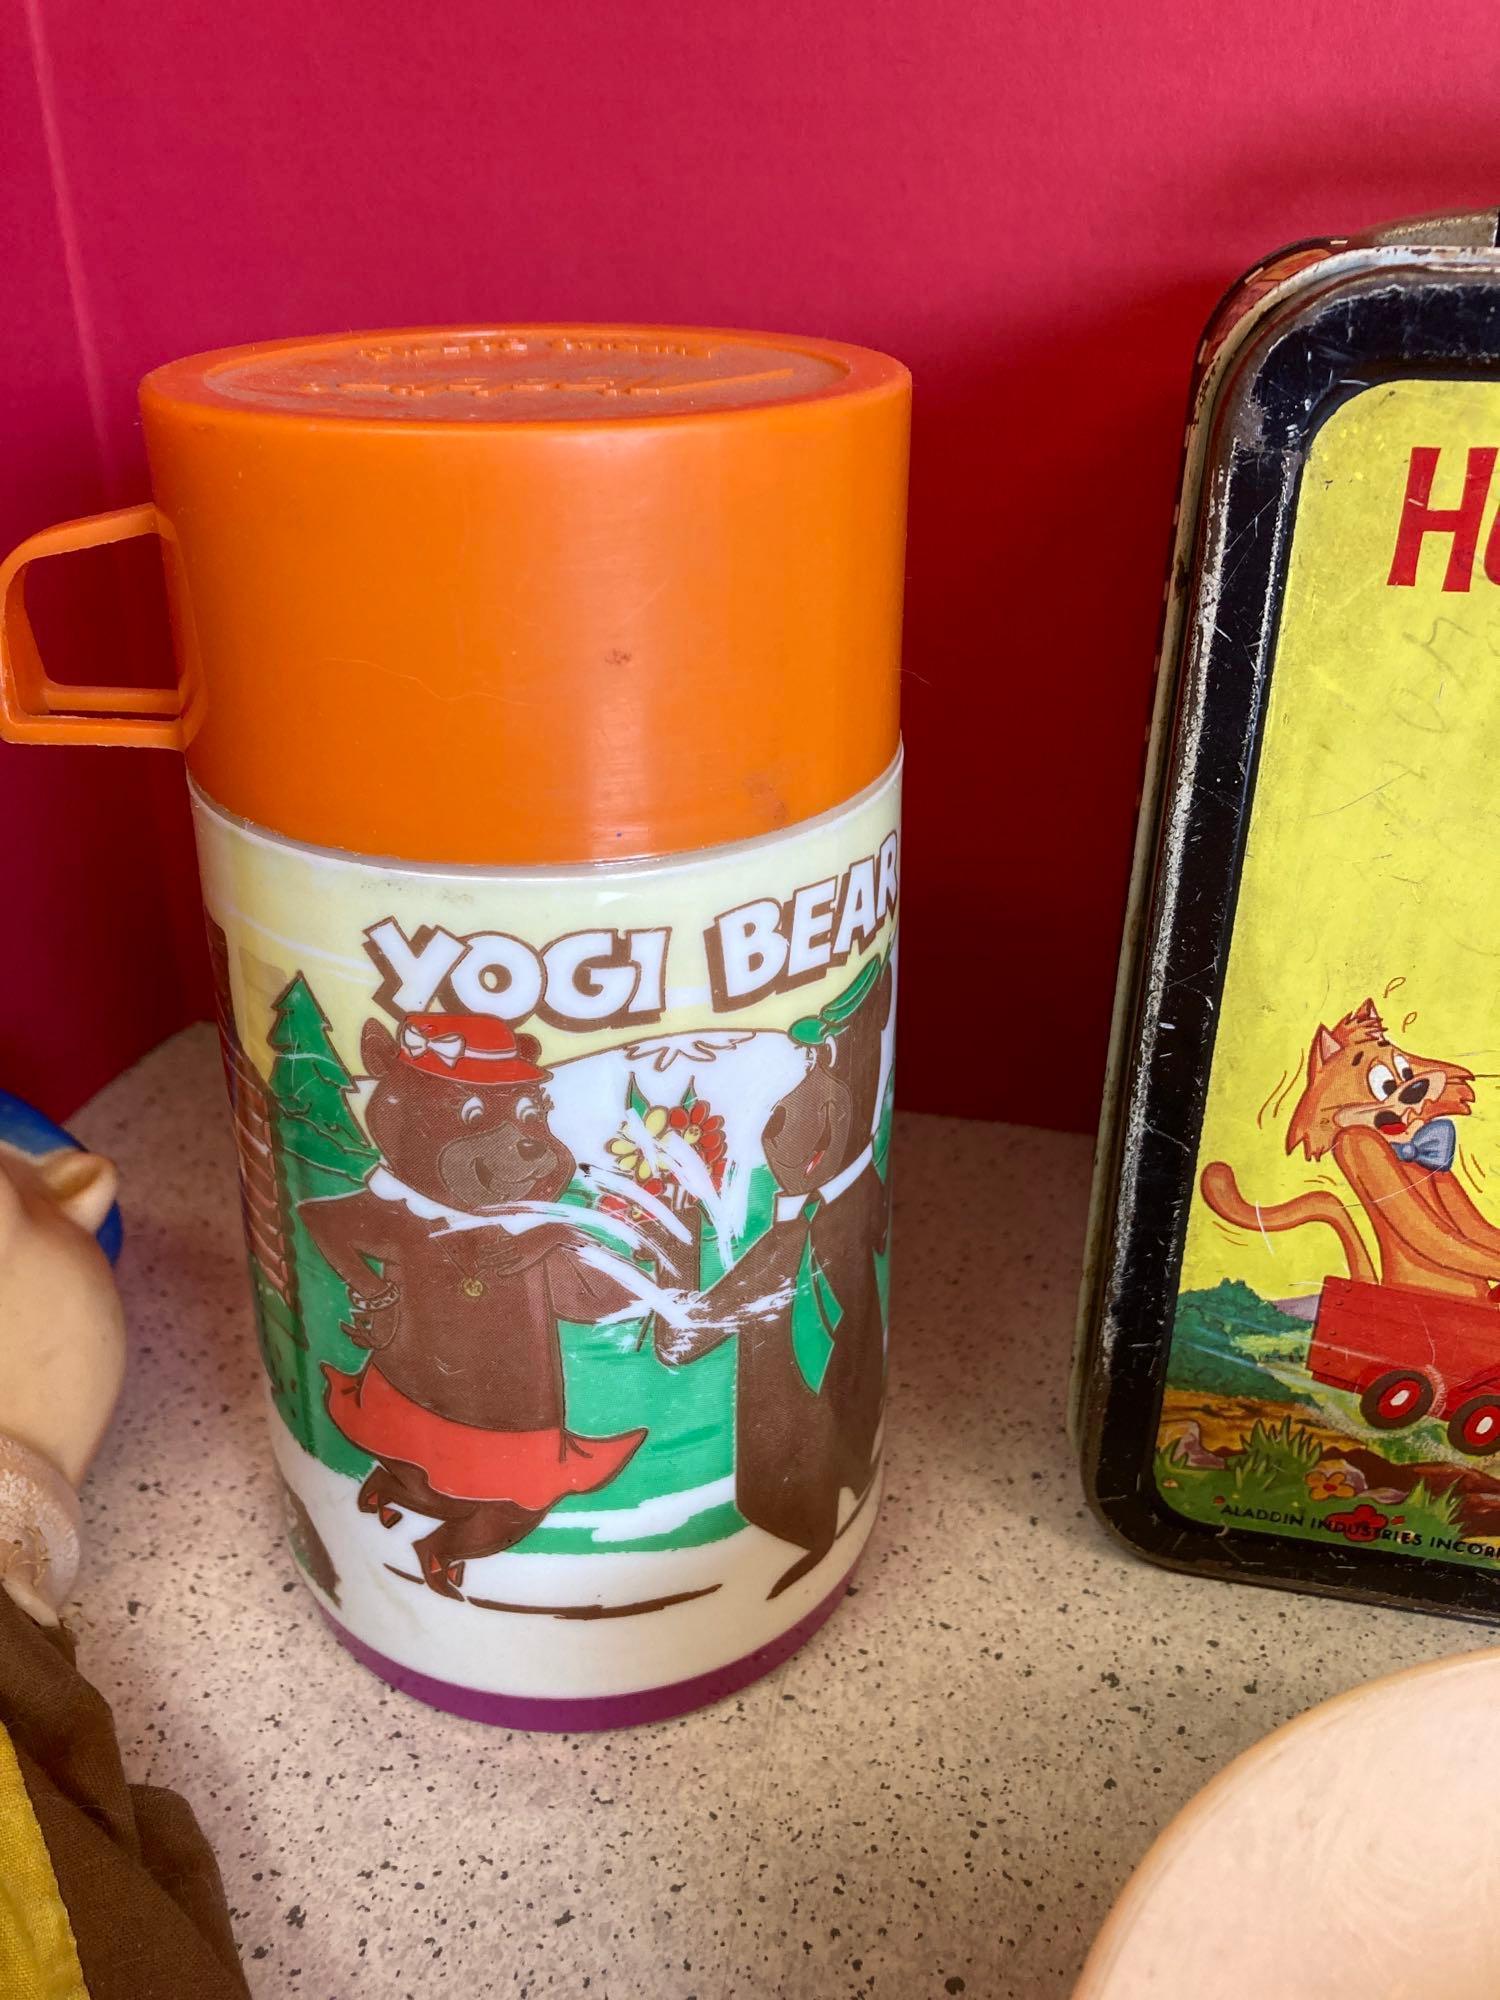 Yogi Bear and Huckleberry Hound items see pictures for list